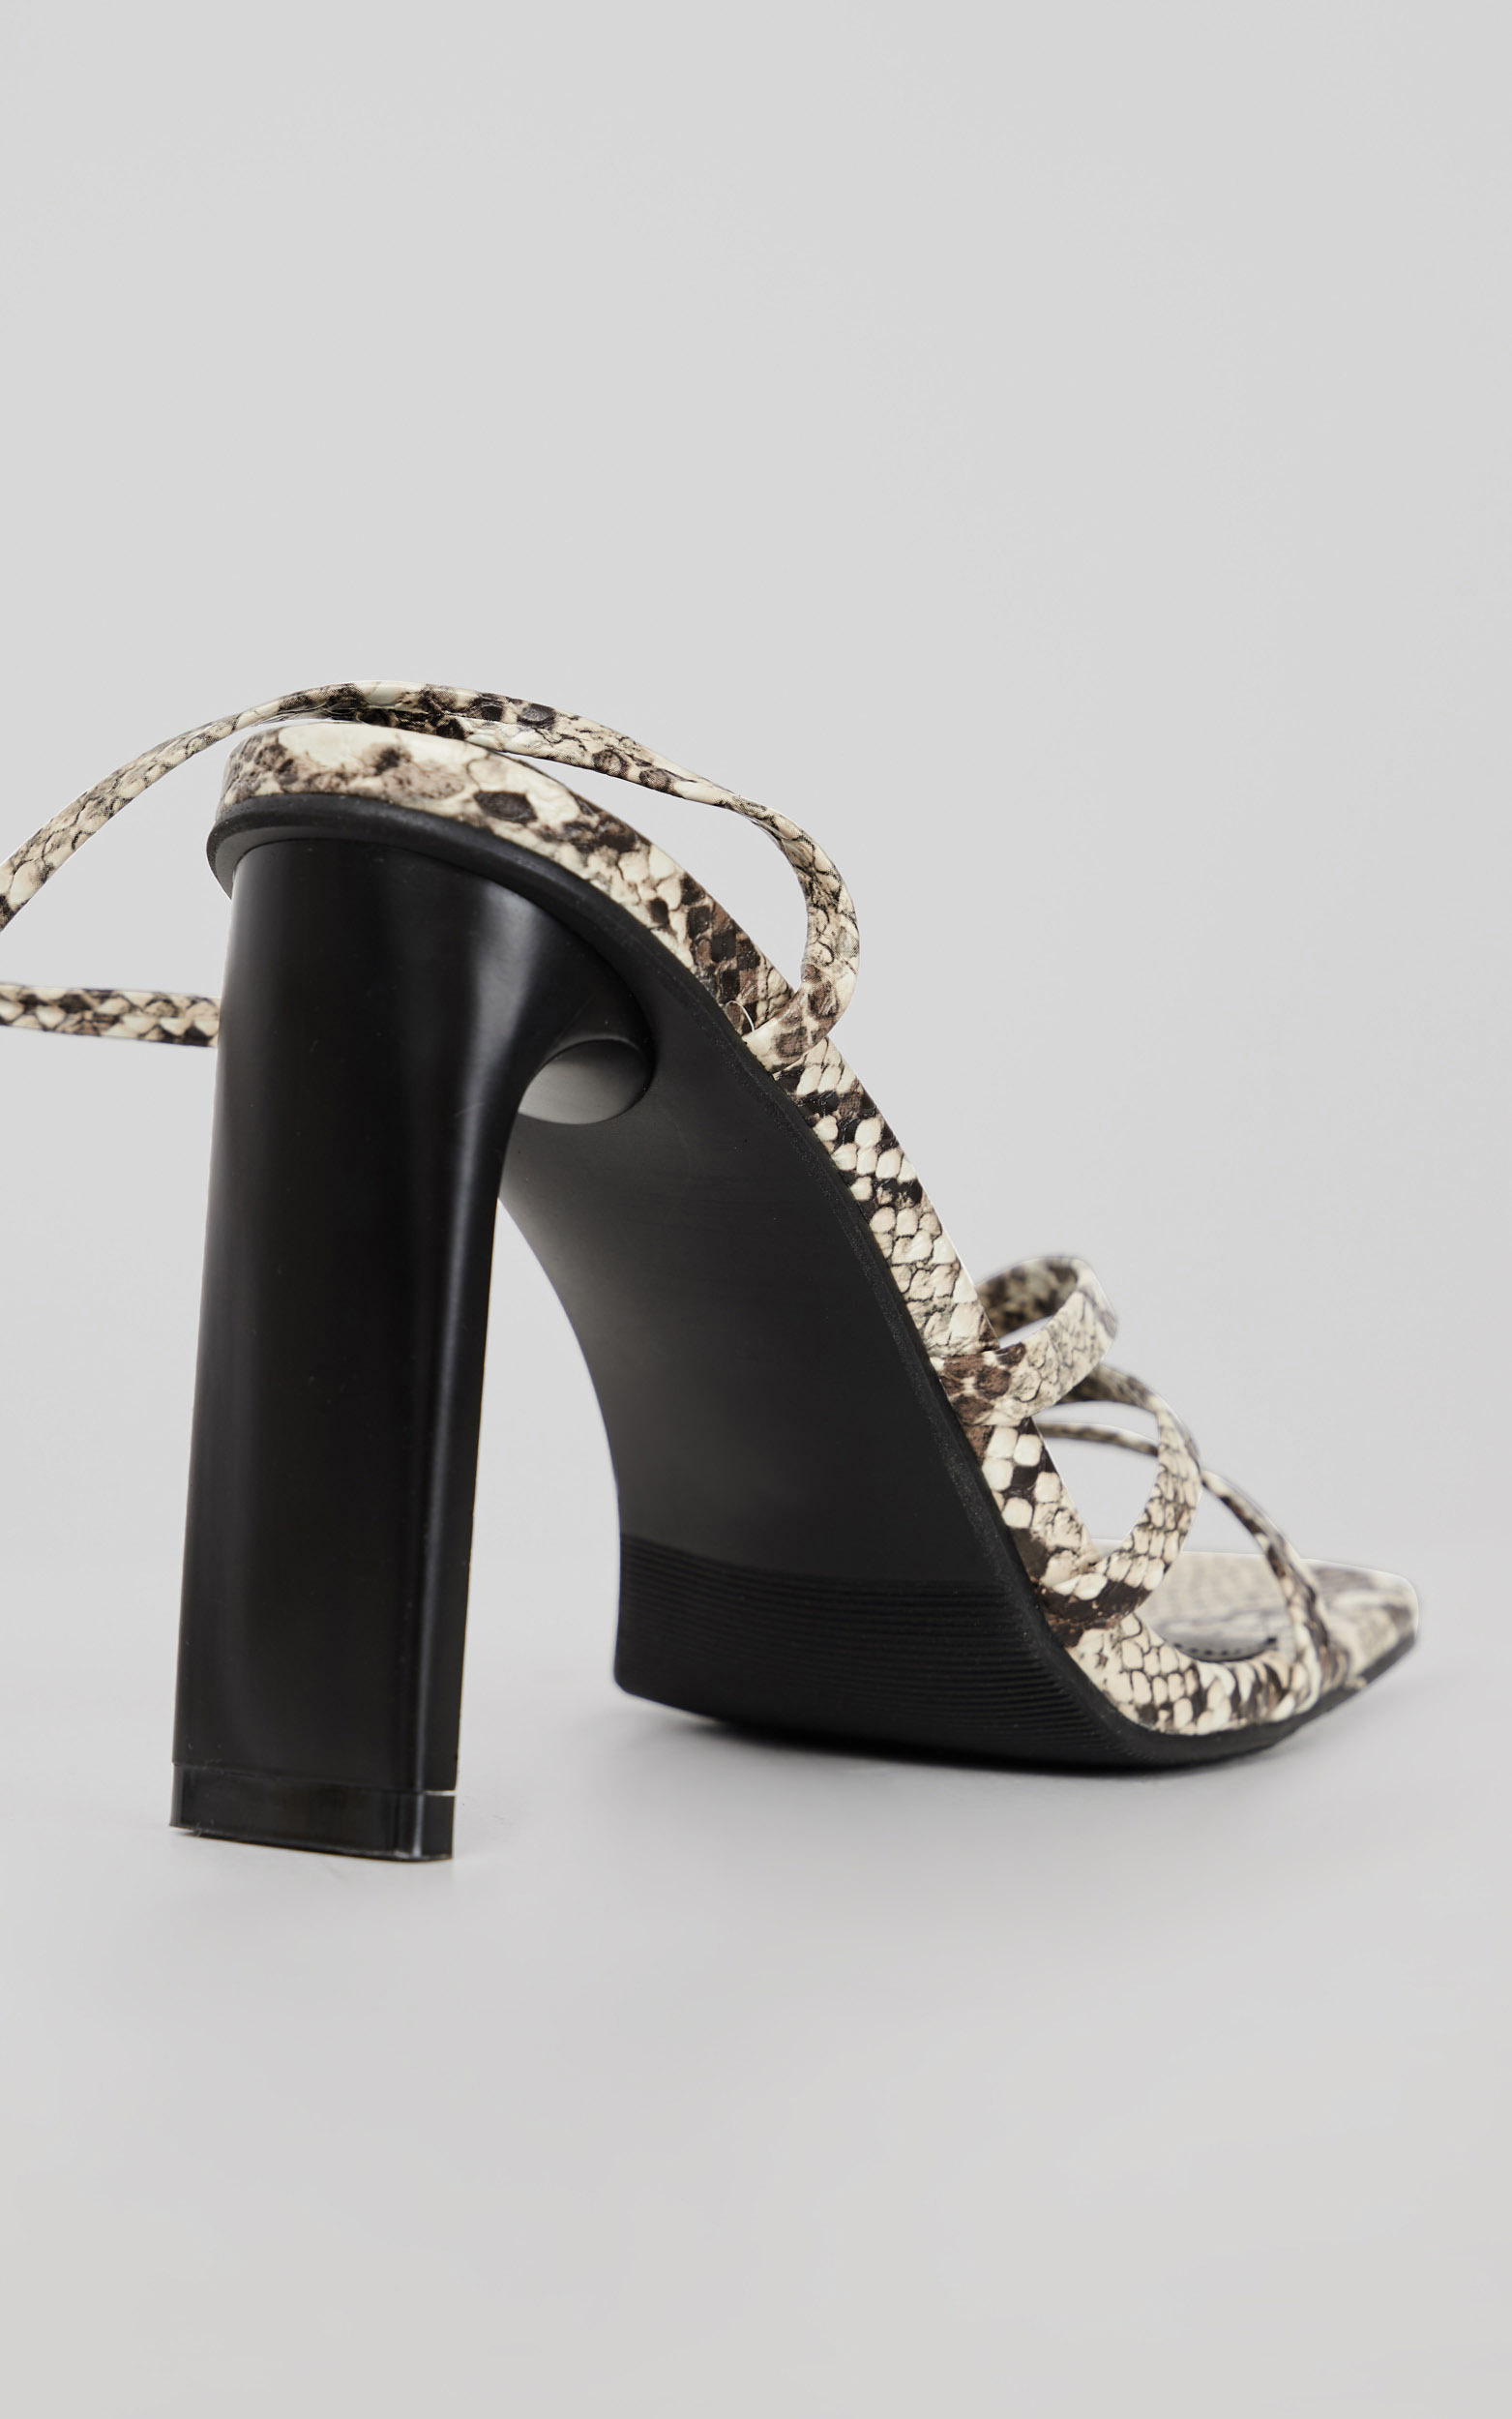 4th & Reckless - Dove Heels in Snake - 05, GRY1, hi-res image number null